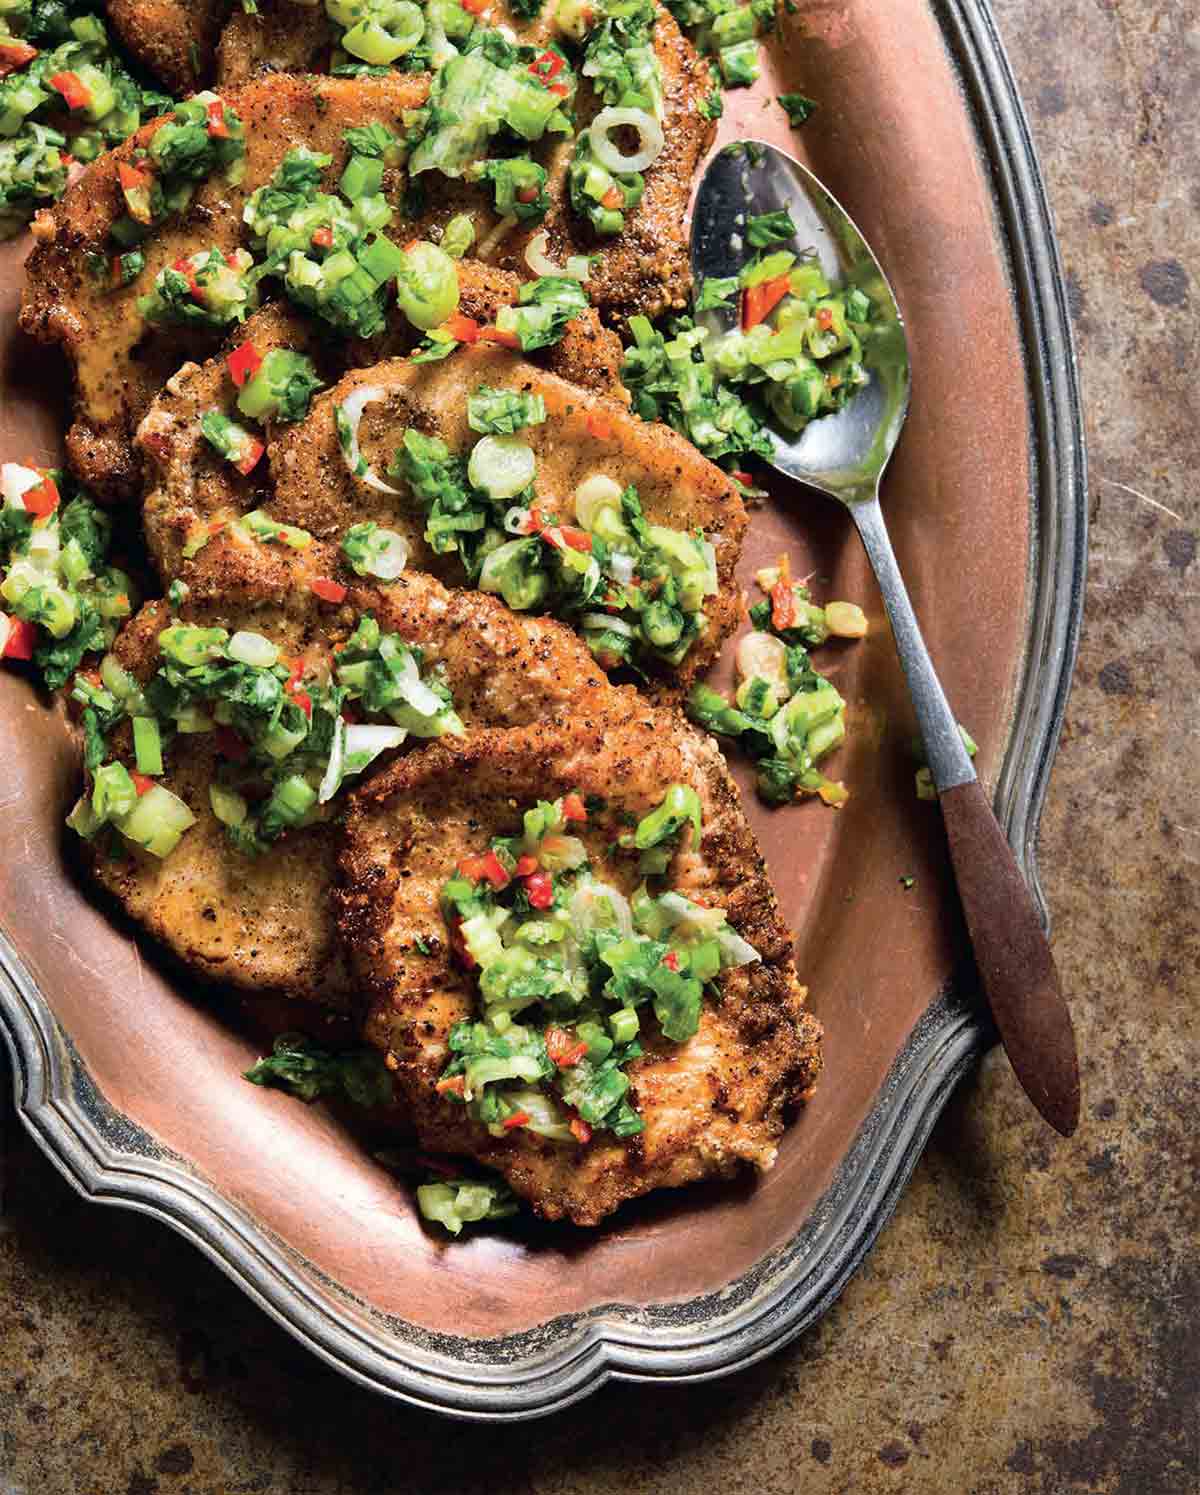 Several seared salt and pepper pork chops topped with a scallion and pepper mixture on a platter with a spoon resting on the side.